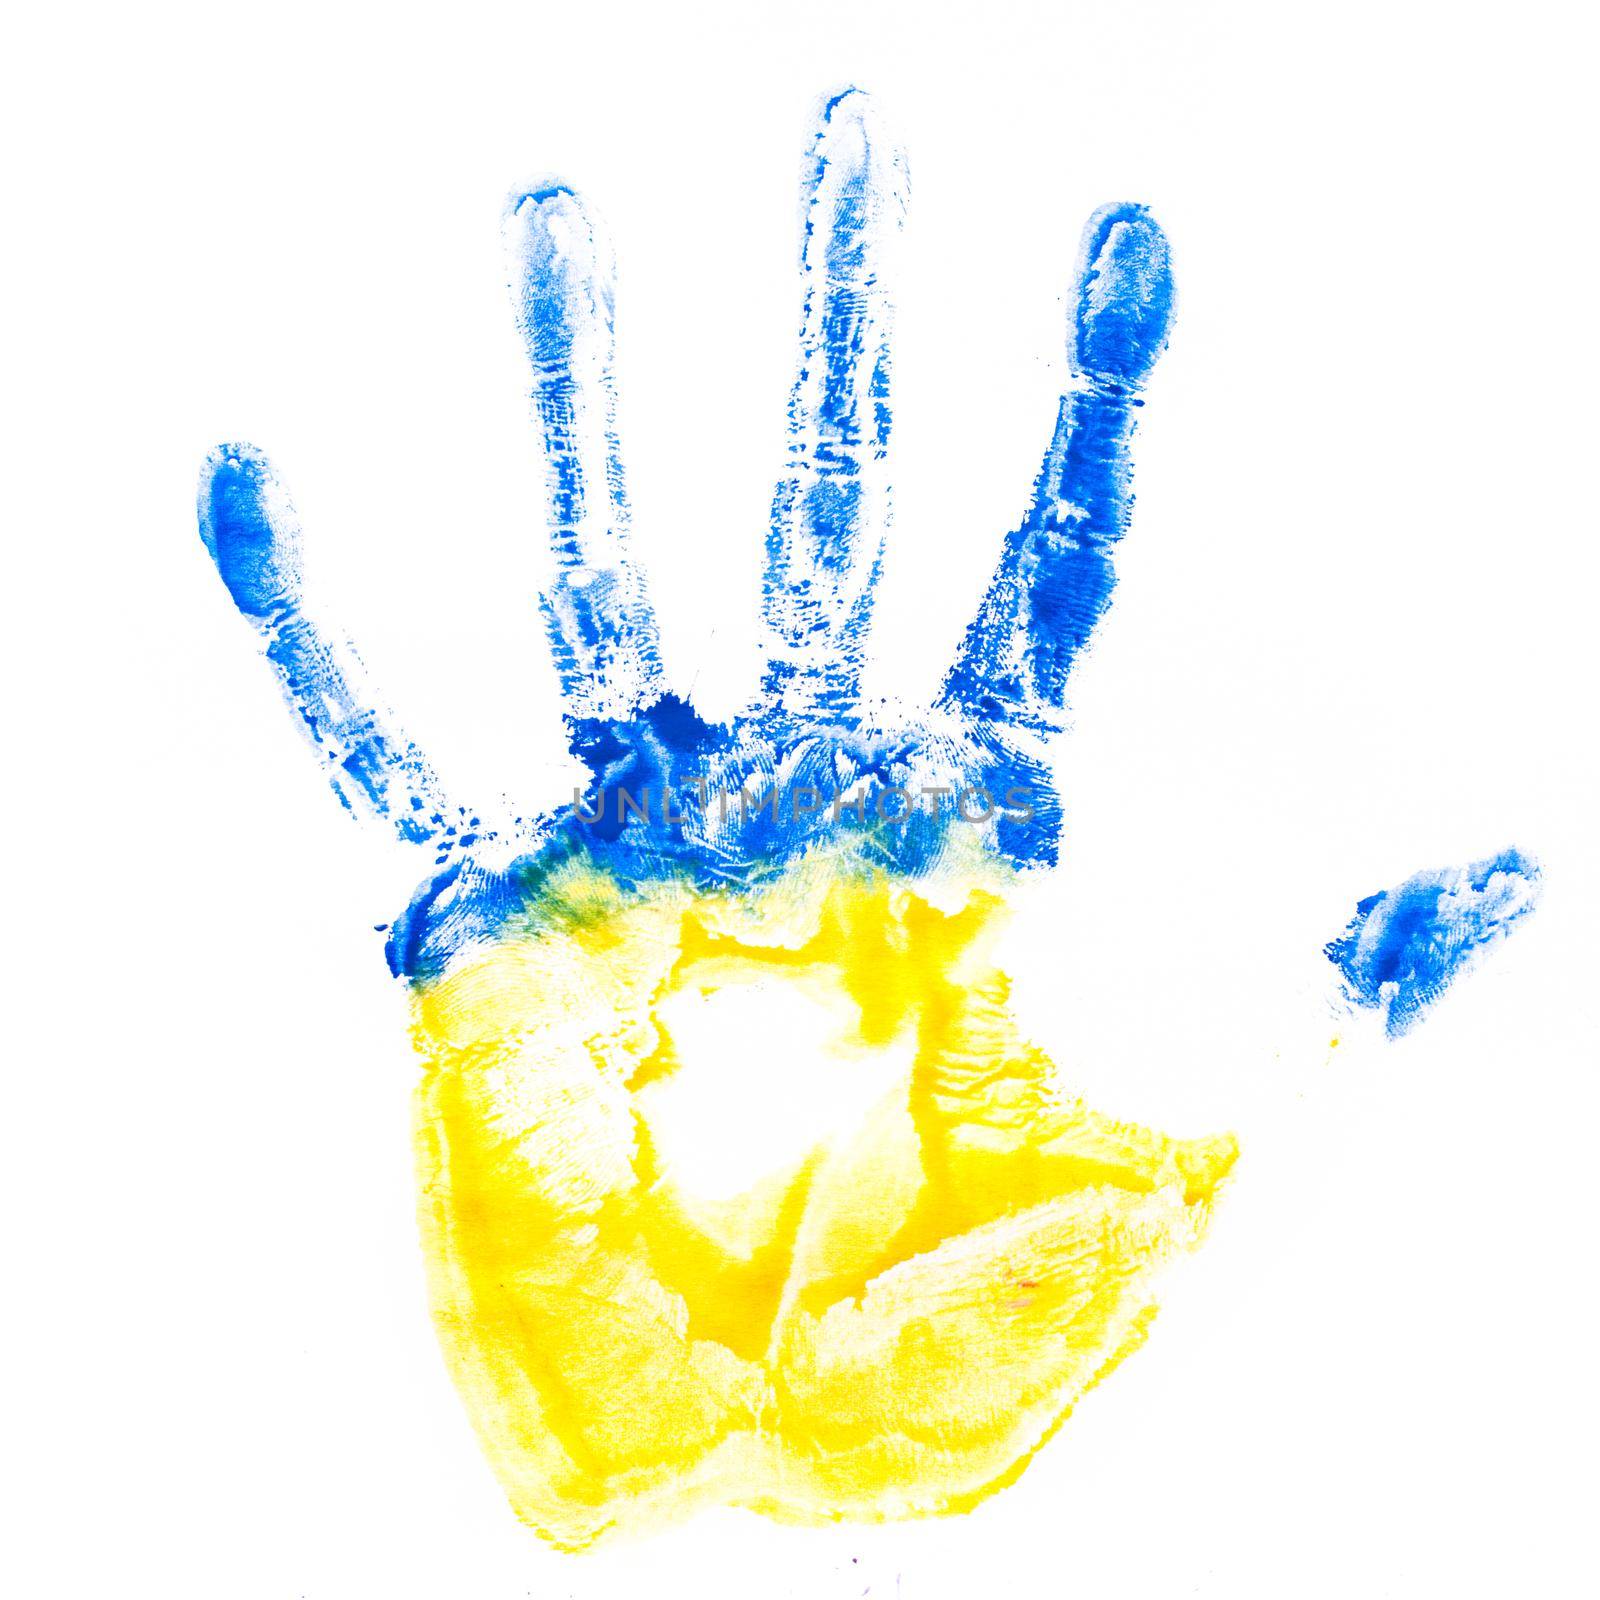 Child's hand imprint in colors of Ukraine flag isolated on white